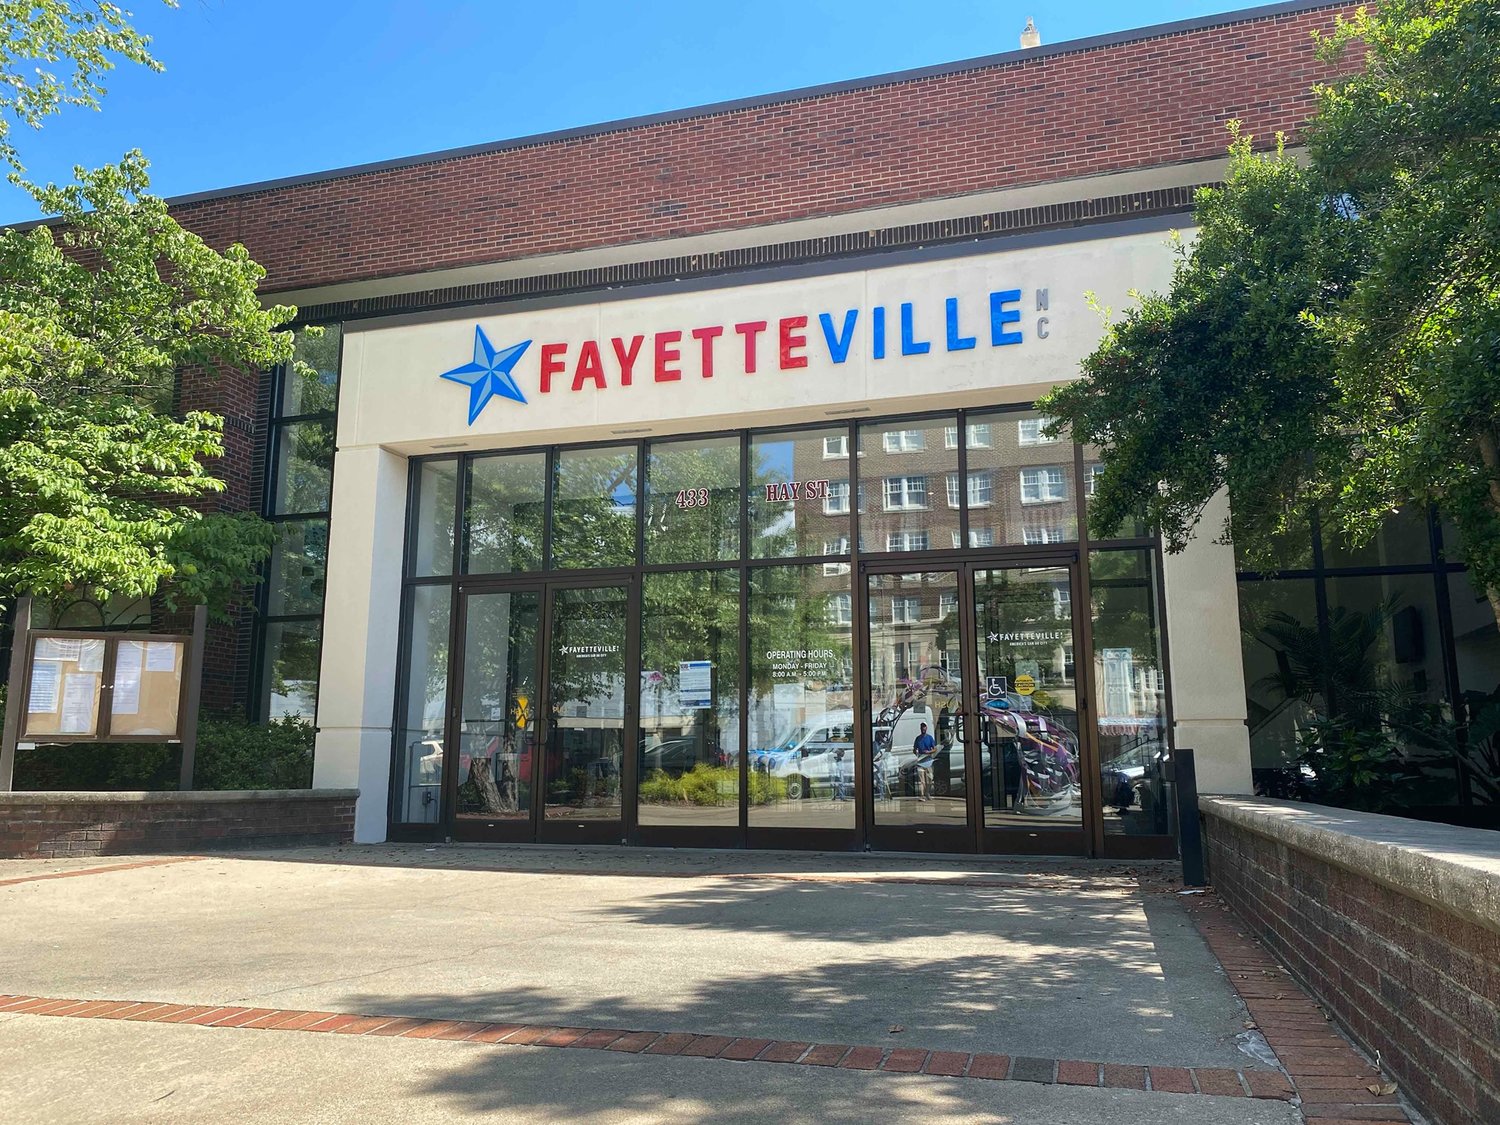 An effort to restructure how Fayetteville City Council members are elected hit a snag this week when the council delayed action on whether to put the issue before voters in November.